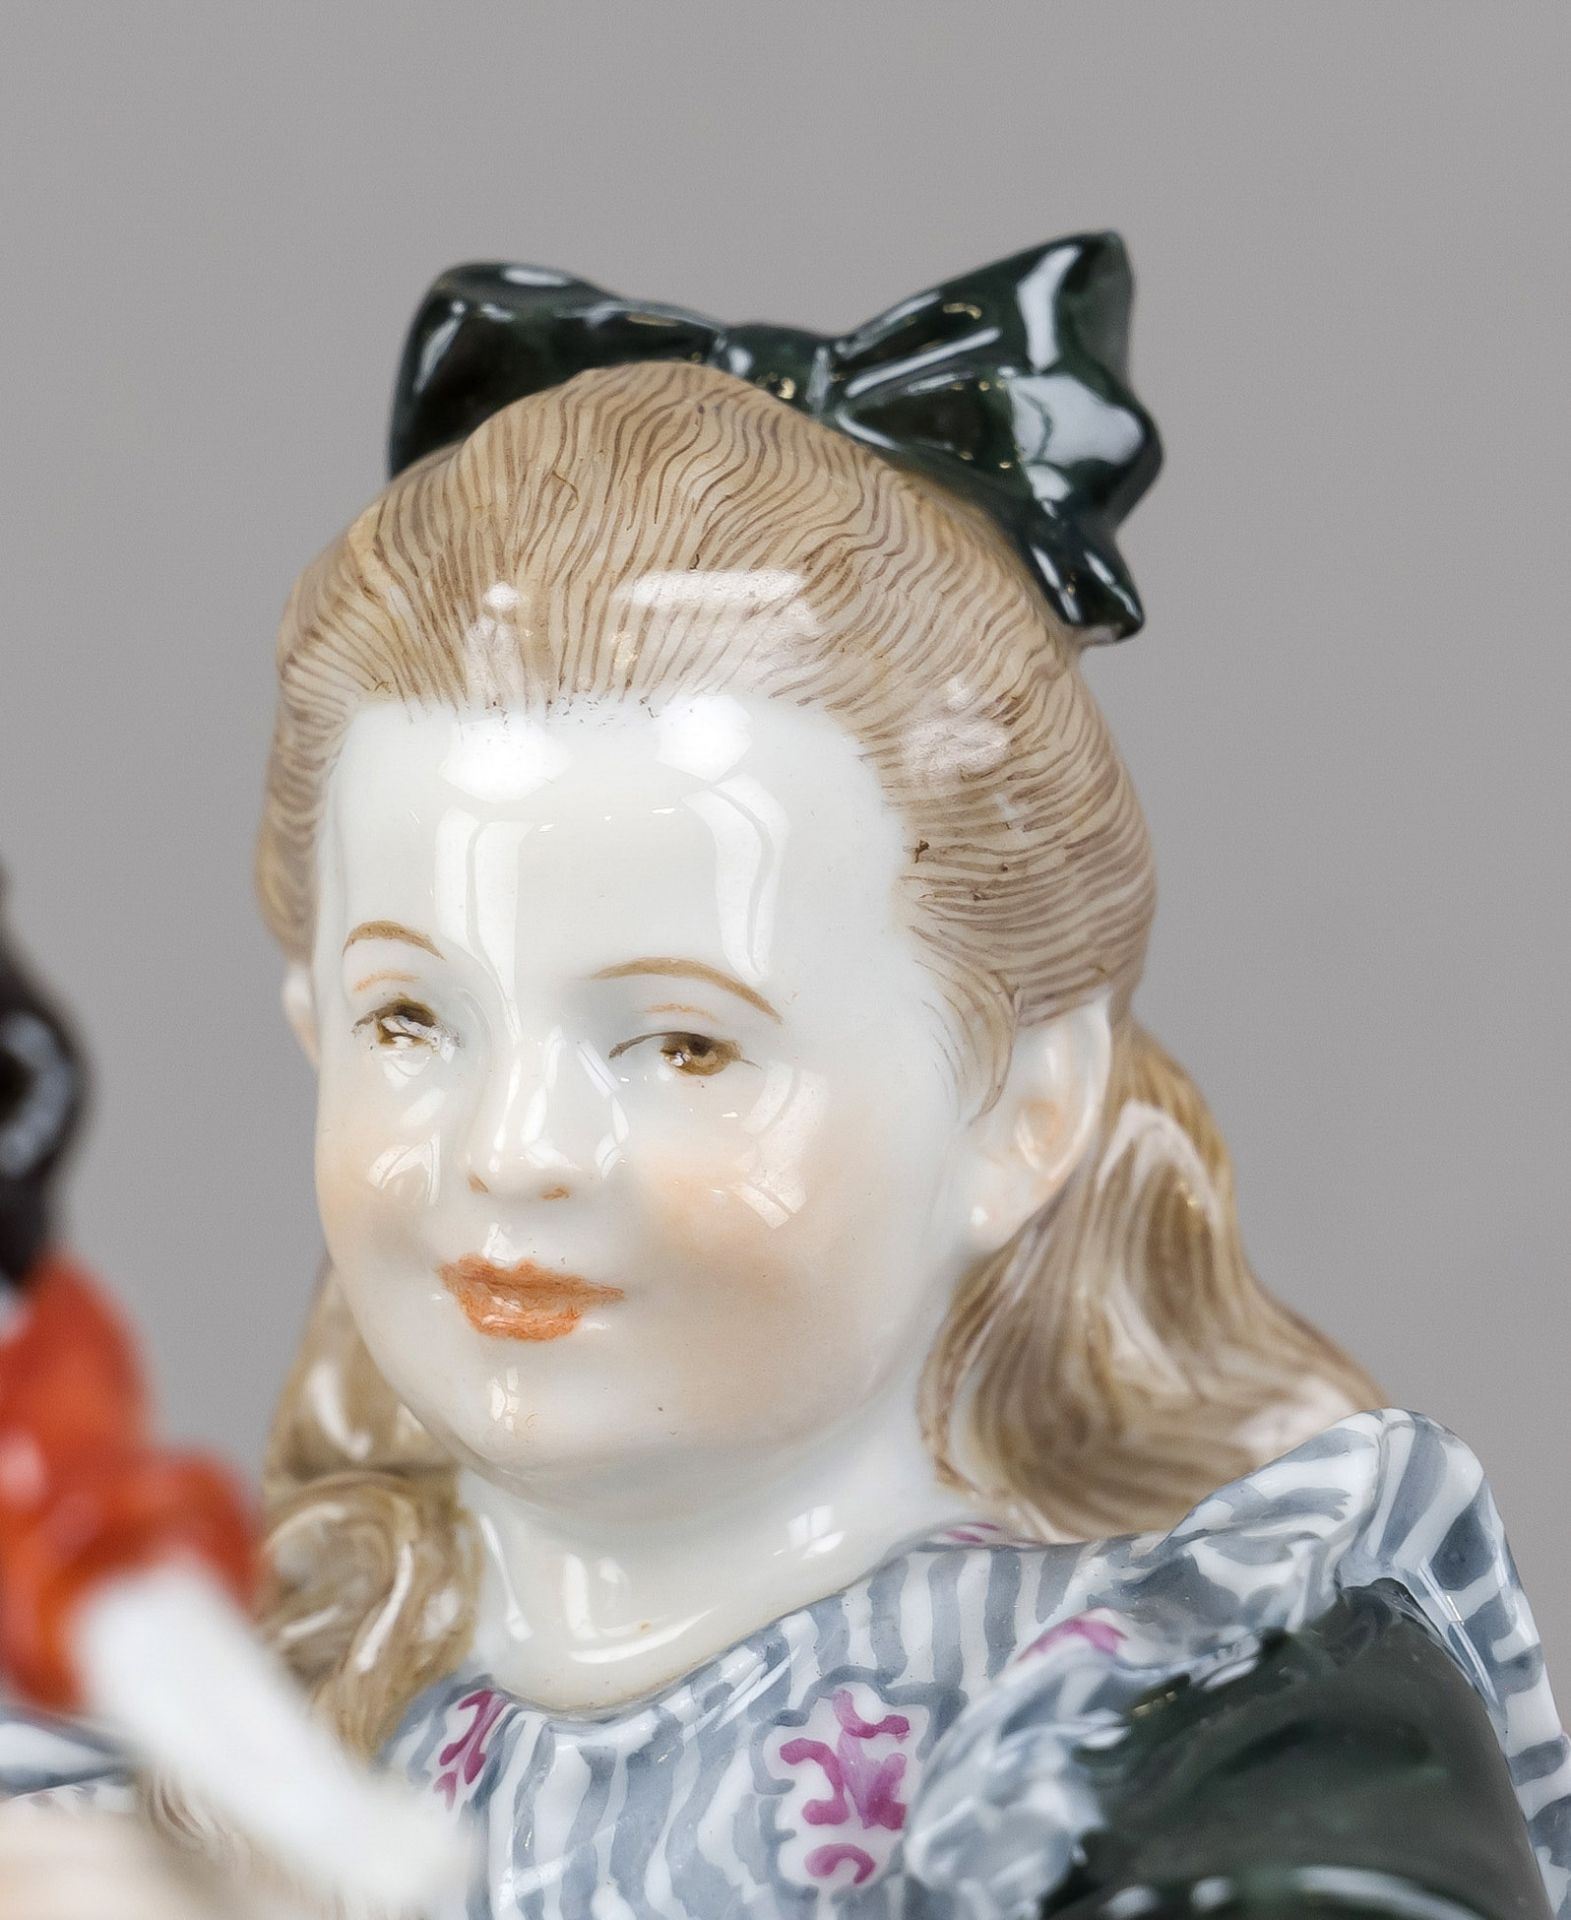 Girl with doll, Meissen, Knauff Schwerter mark 1850-1924, 1st choice, designed by Paul Helmig 1911/ - Image 4 of 4